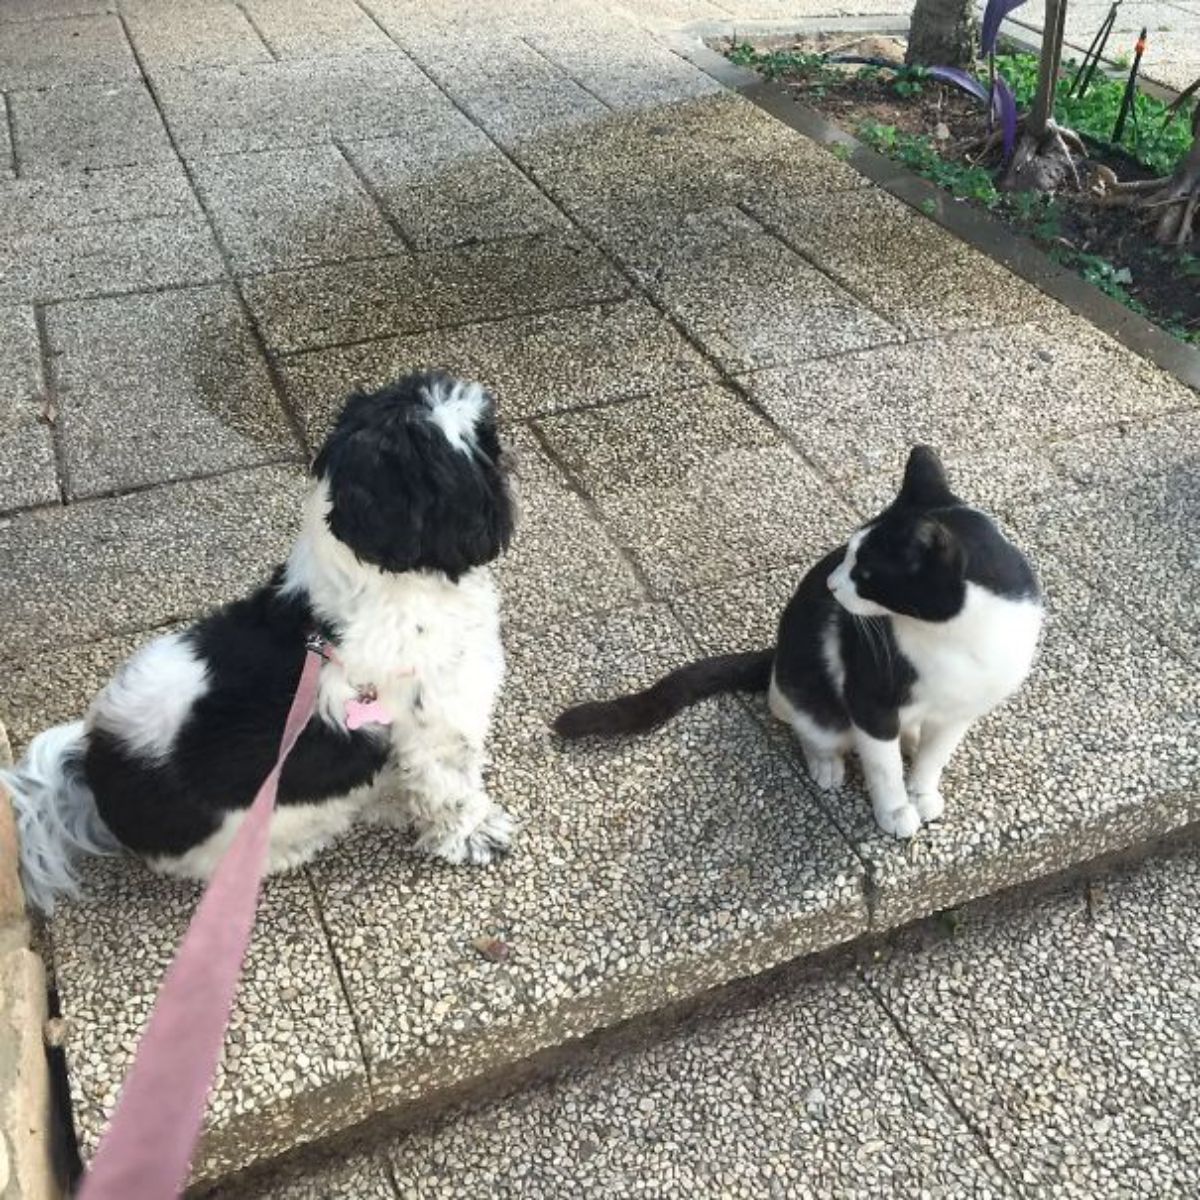 black and white dog on a pink leash sitting next to a black and white cat